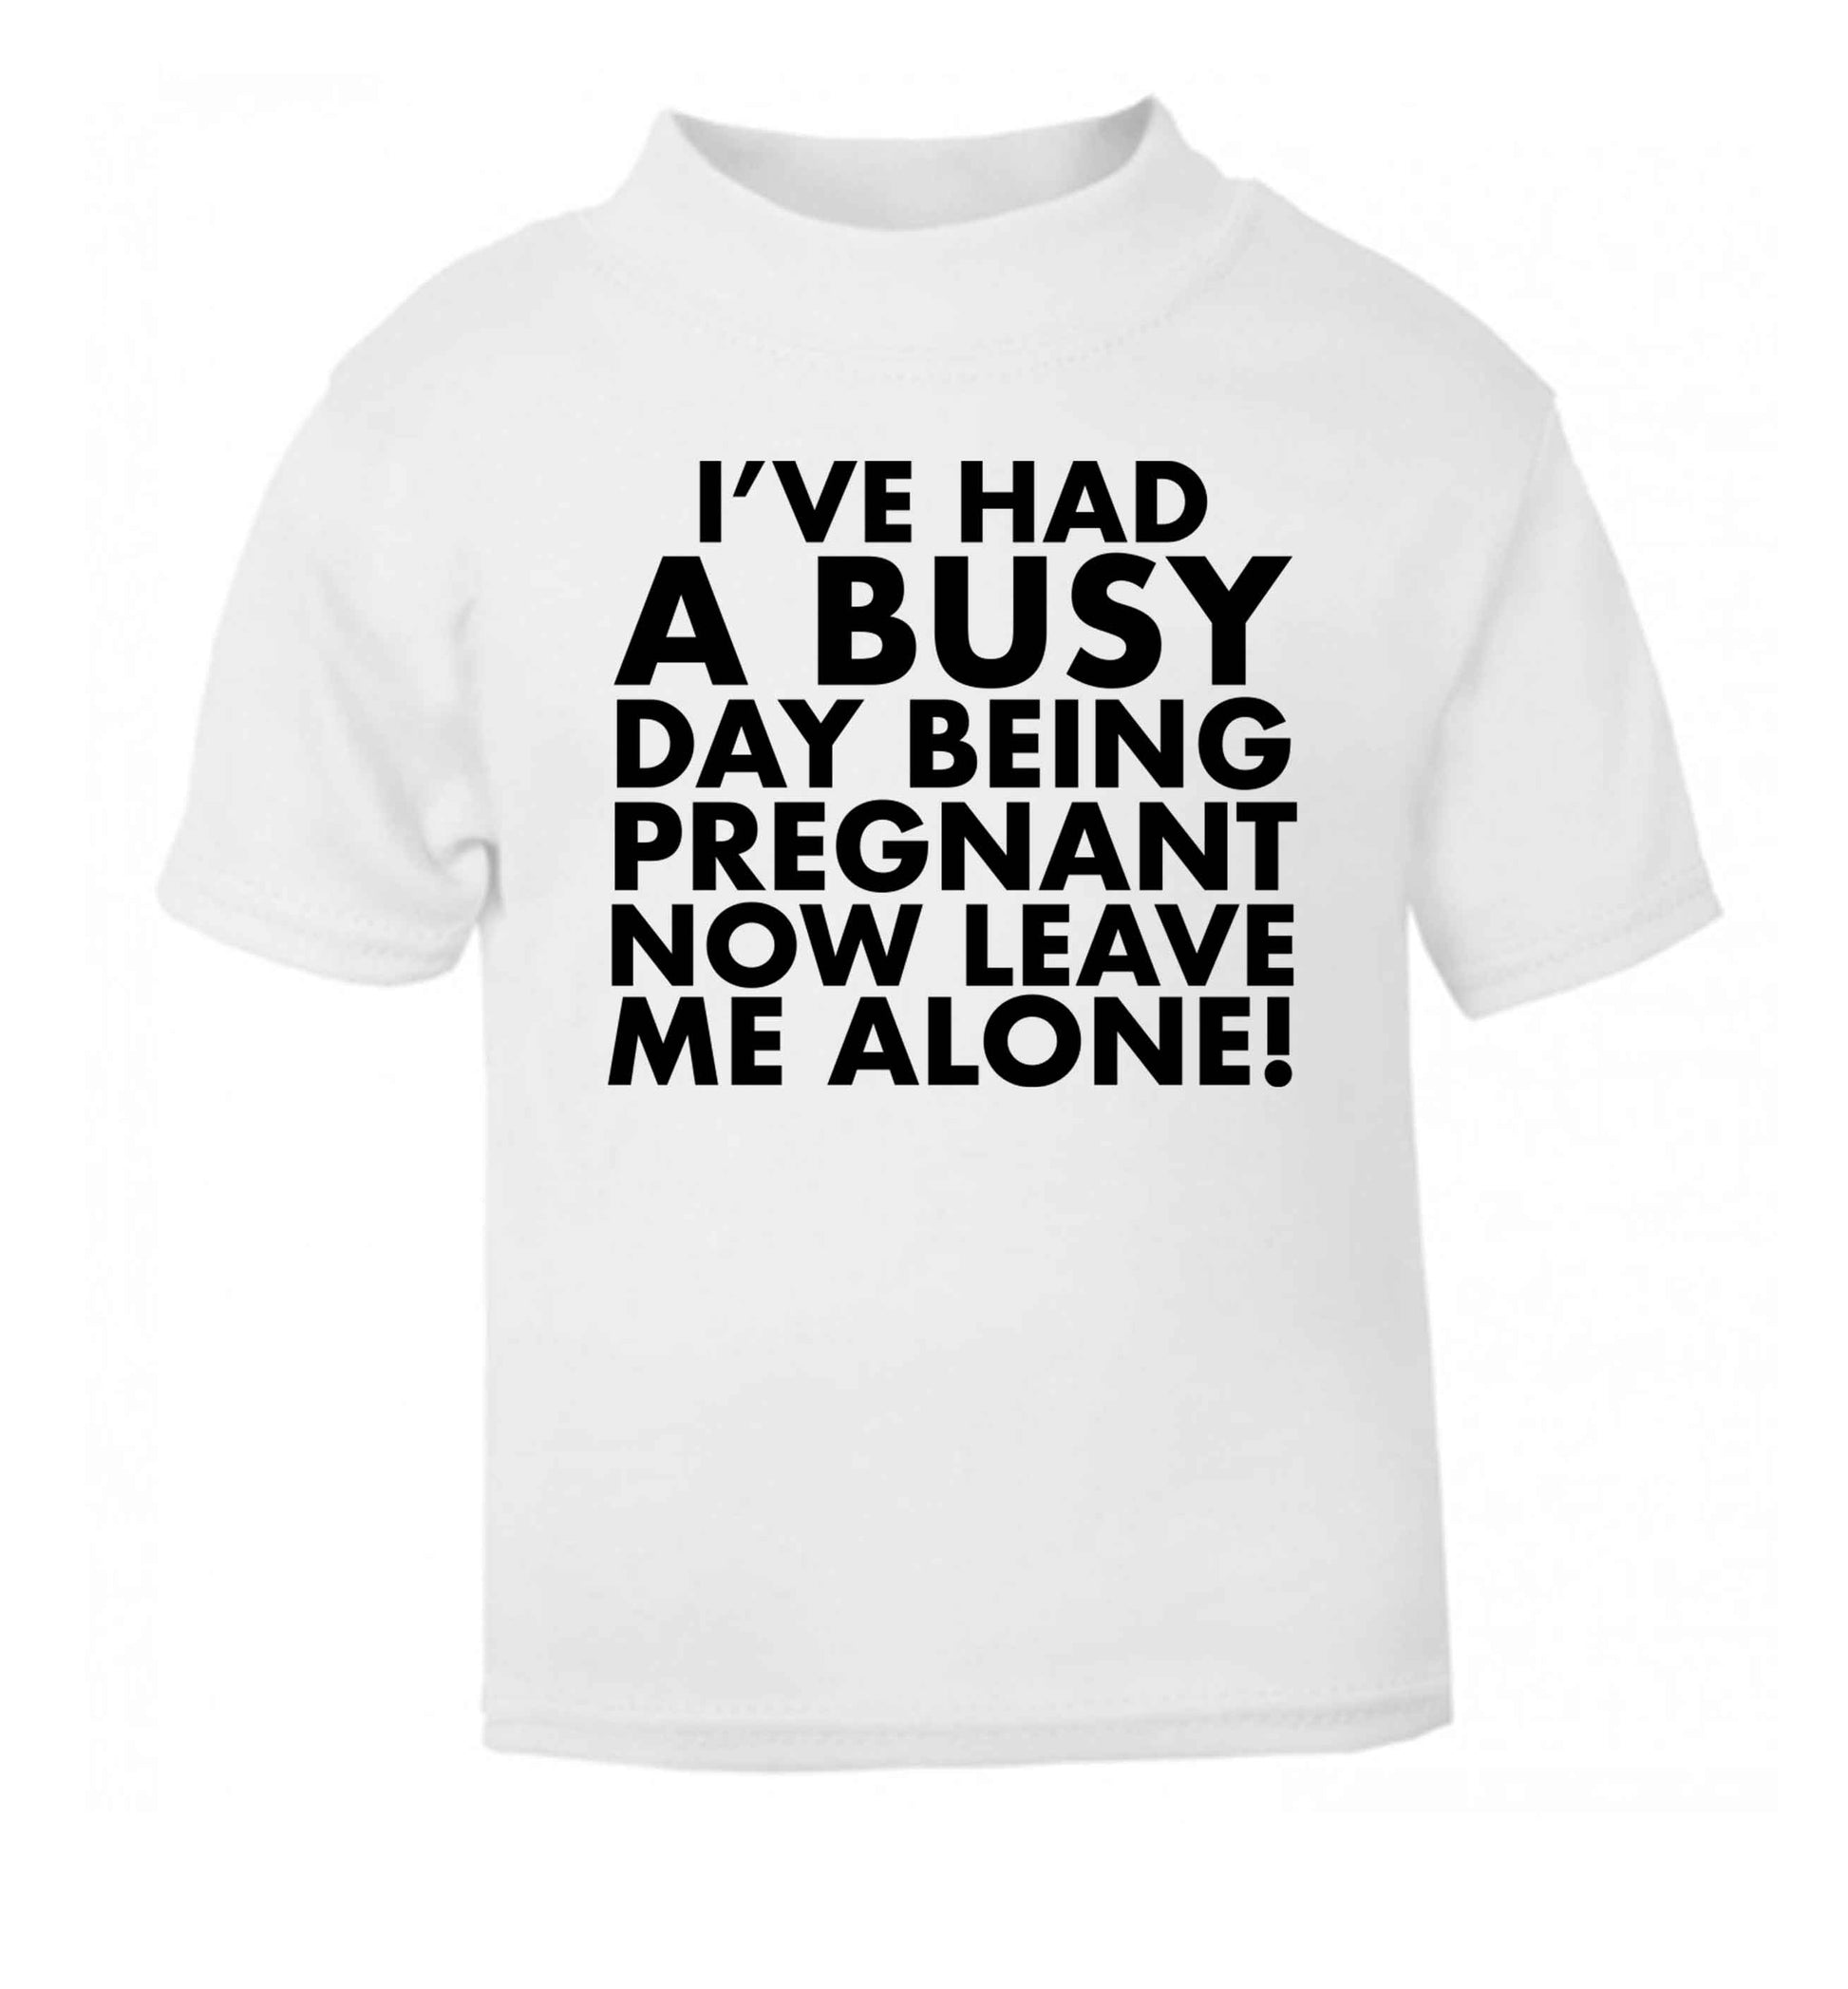 I've had a busy day being pregnant now leave me alone white Baby Toddler Tshirt 2 Years